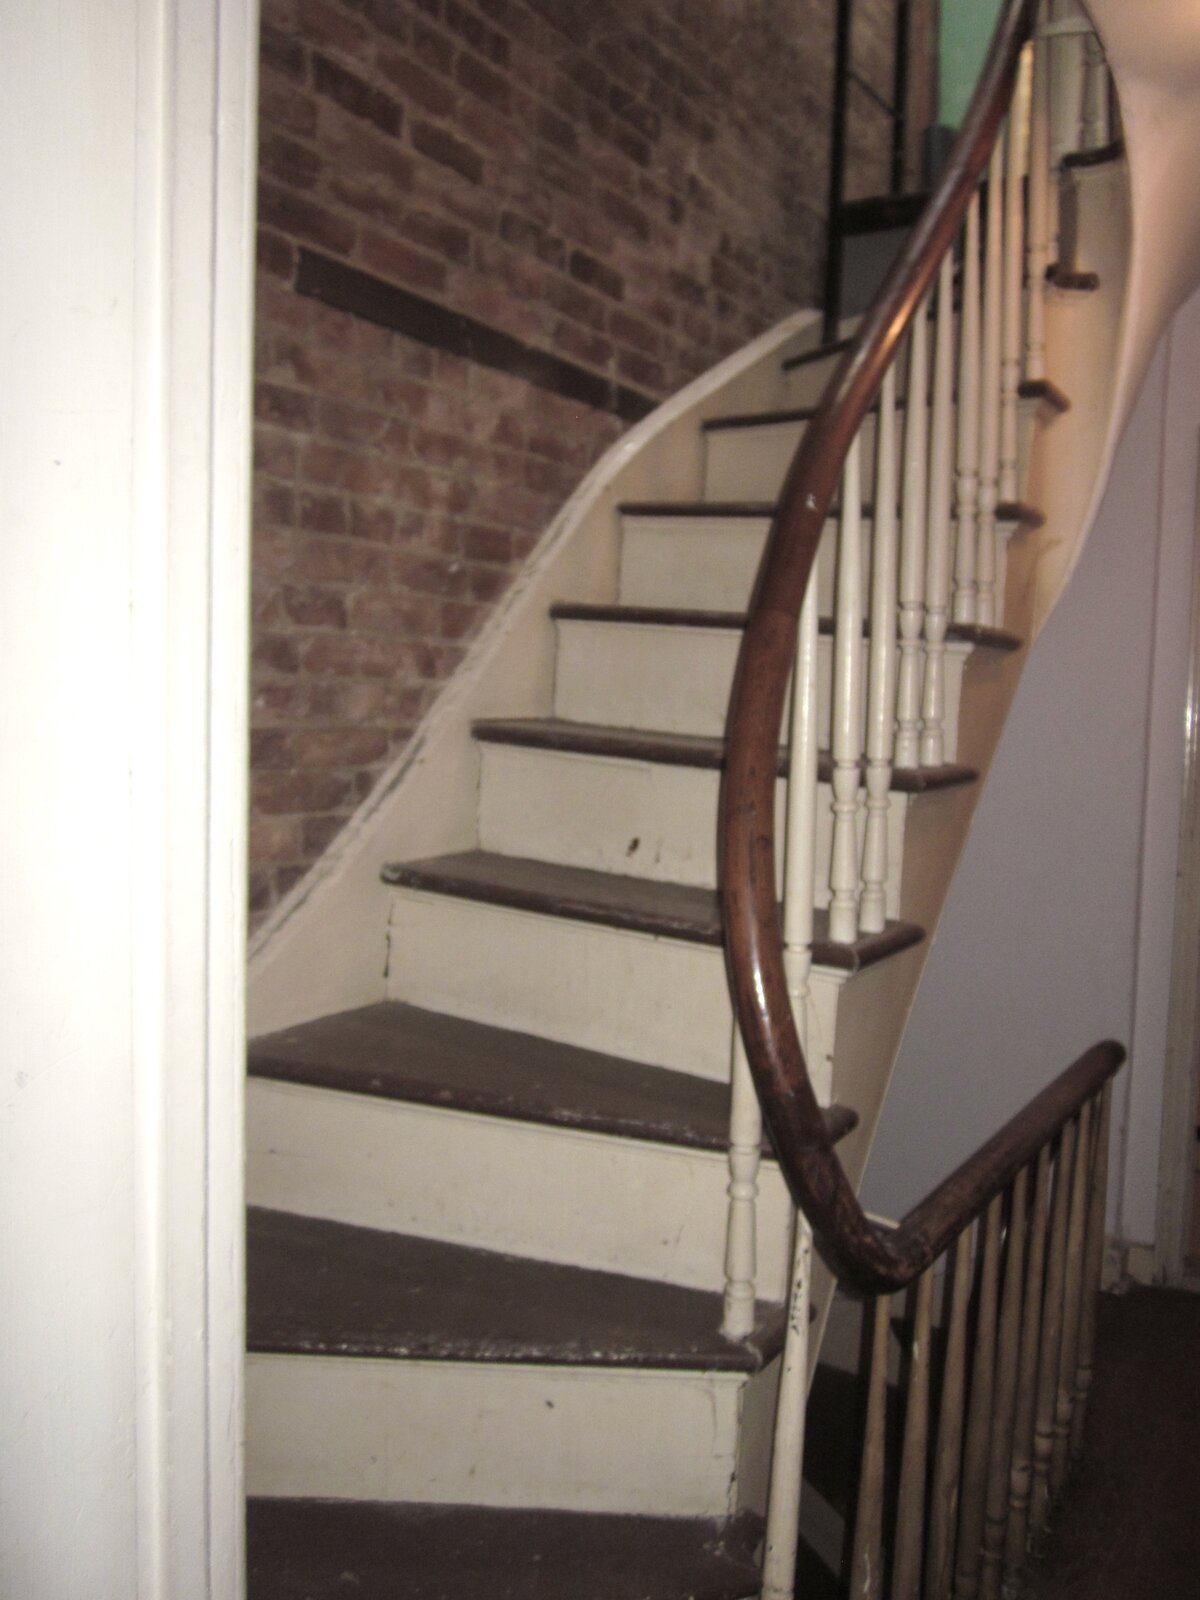  Before: Existing staircases had curved handrails and spindle balusters. 